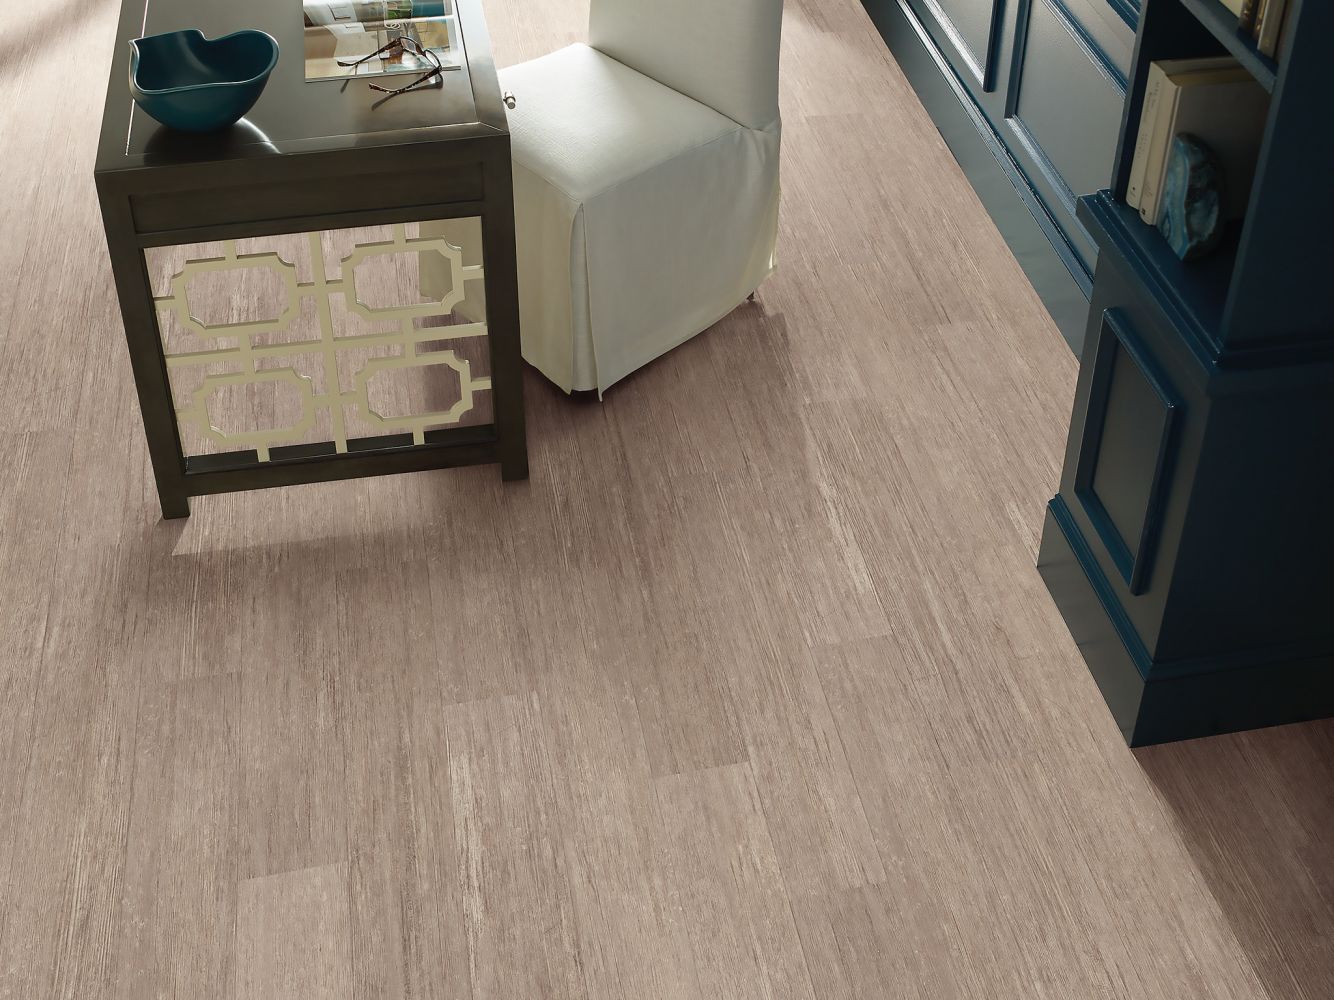 Shaw Floors 5th And Main Symbiotic 12 Flaxen 00216_5M302